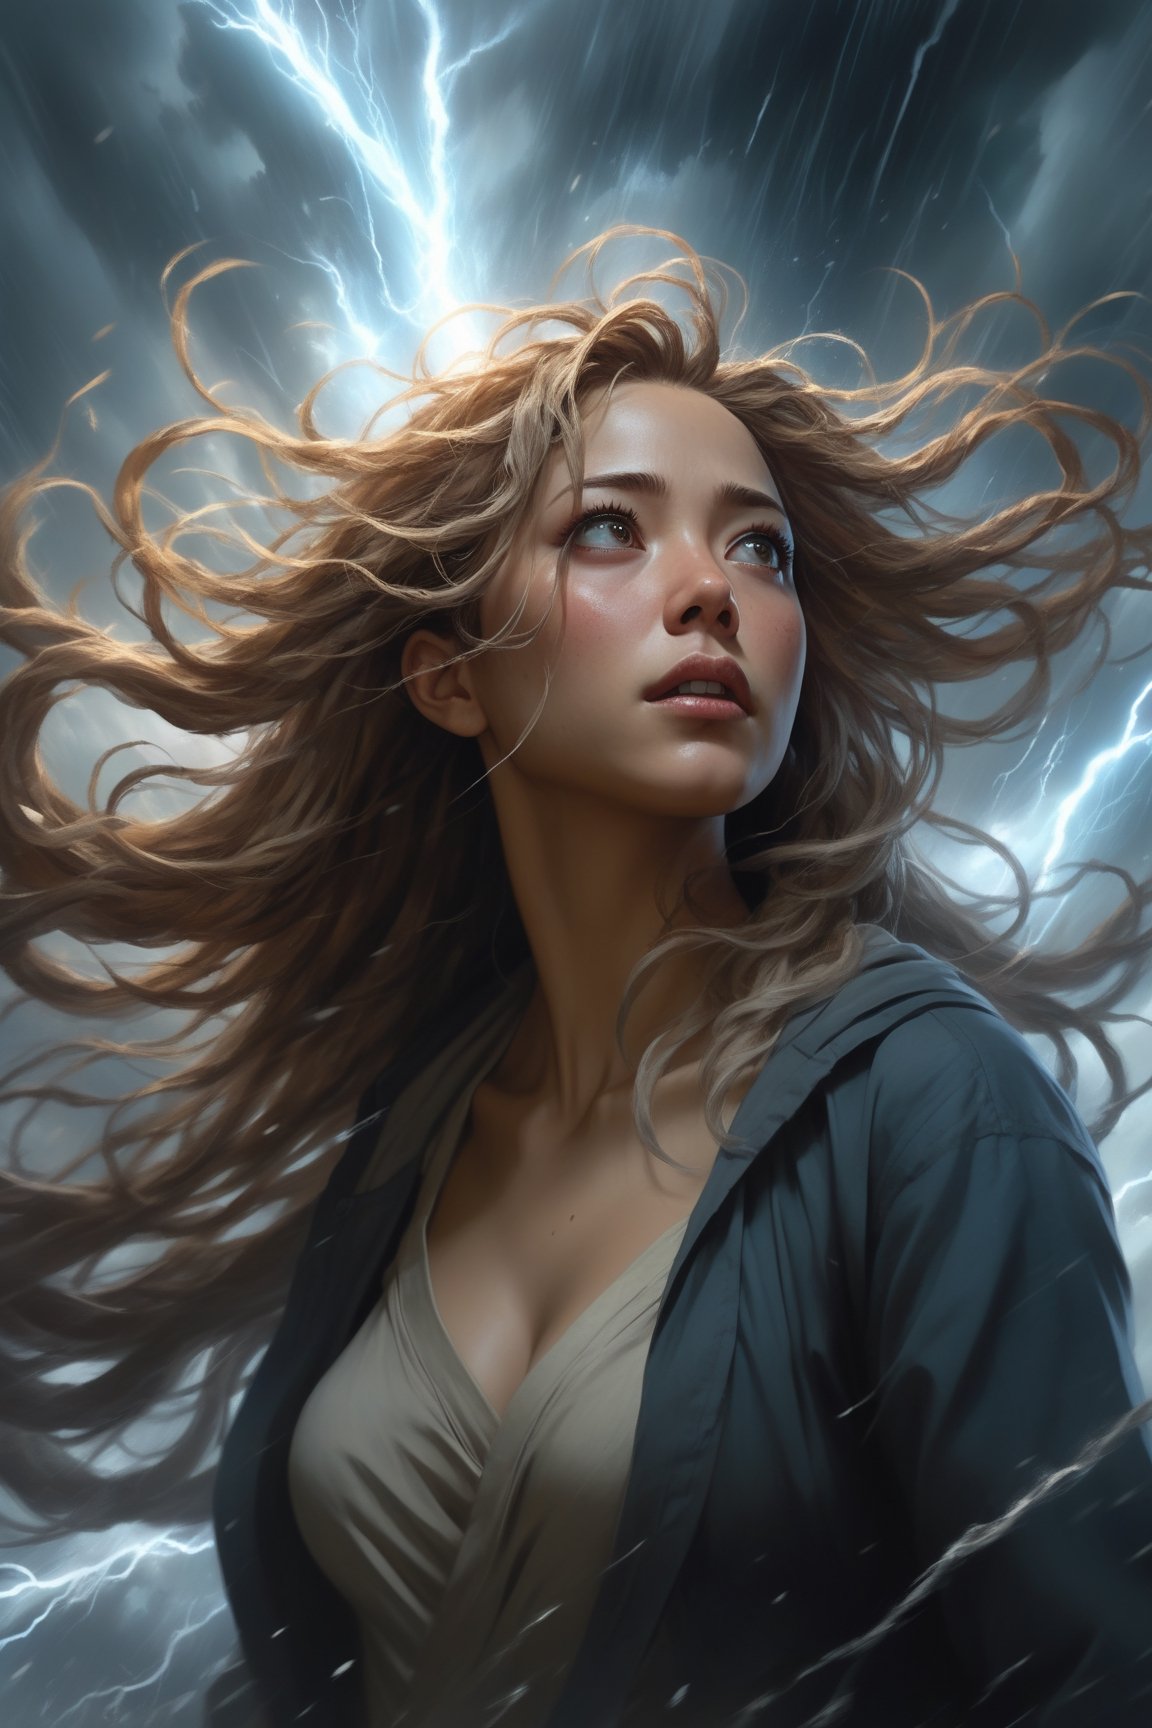 Alejandro Burdisio's style blend with Aleksi Briclot, poster view, Detailed split of an (anime woman with flowing hair and expressive eyes:1.7), Her face divided yet (emotionally intertwined:0.8). Amidst the void between the halves, a (digital light storm:1.5) sweeps in random motion, creating a dynamic contrast to her stillness.






